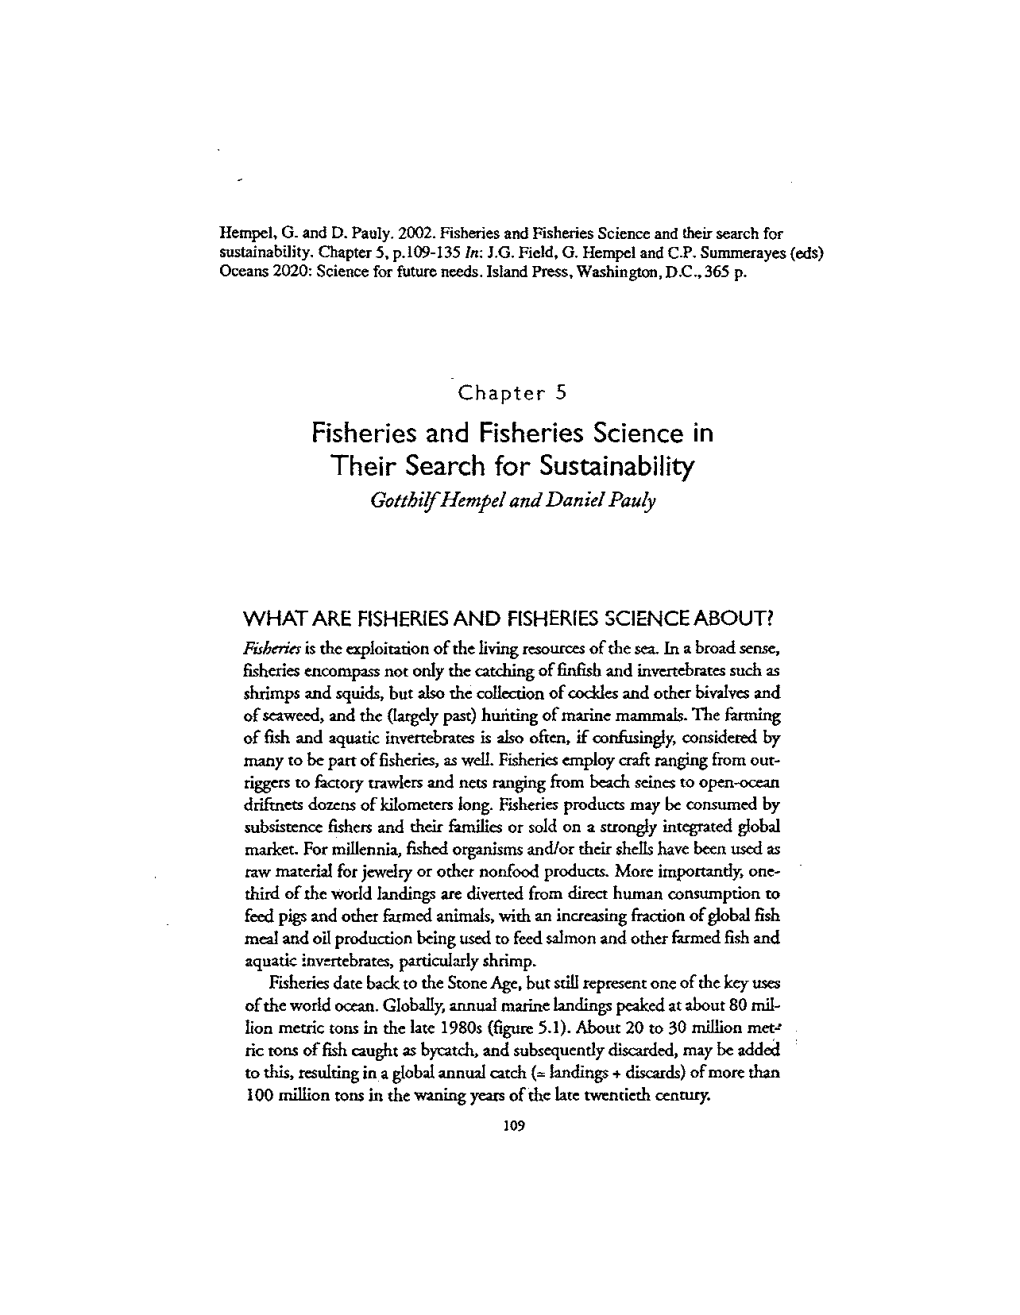 Fisheries and Fisheries Science in Their Search for Sustainability Gofthilfhempel and Daniel Pauly